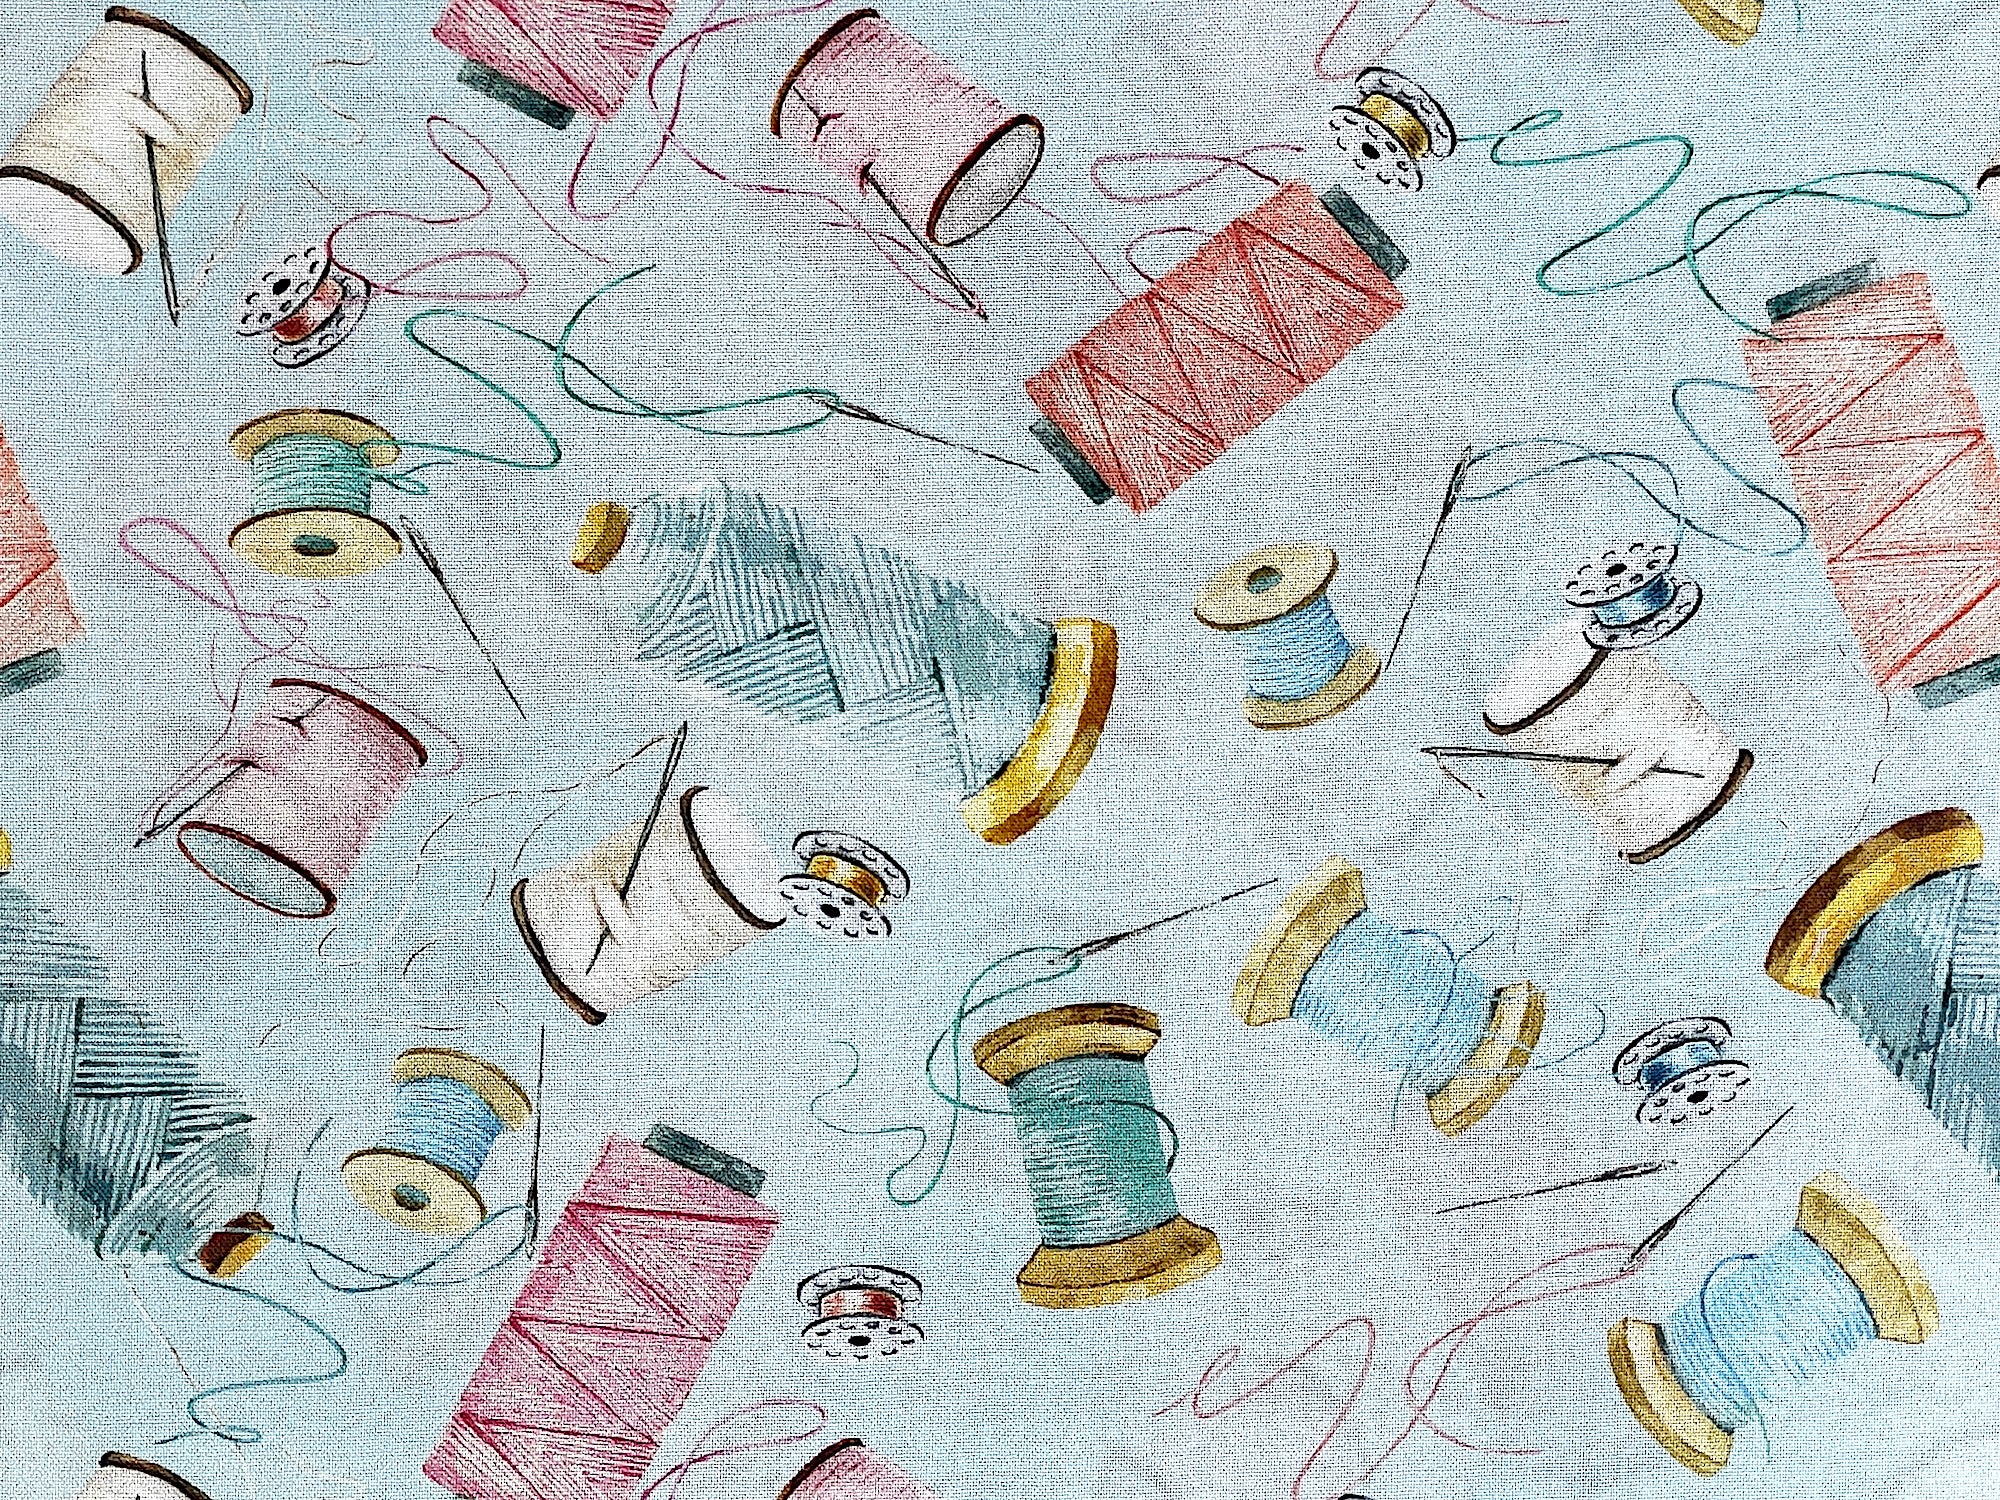 This fabric is part of the Sew in Love Collection by Rockstar Sewing.  This light blue cotton fabric is  covered with spools of thread, bobbins and sewing needles.